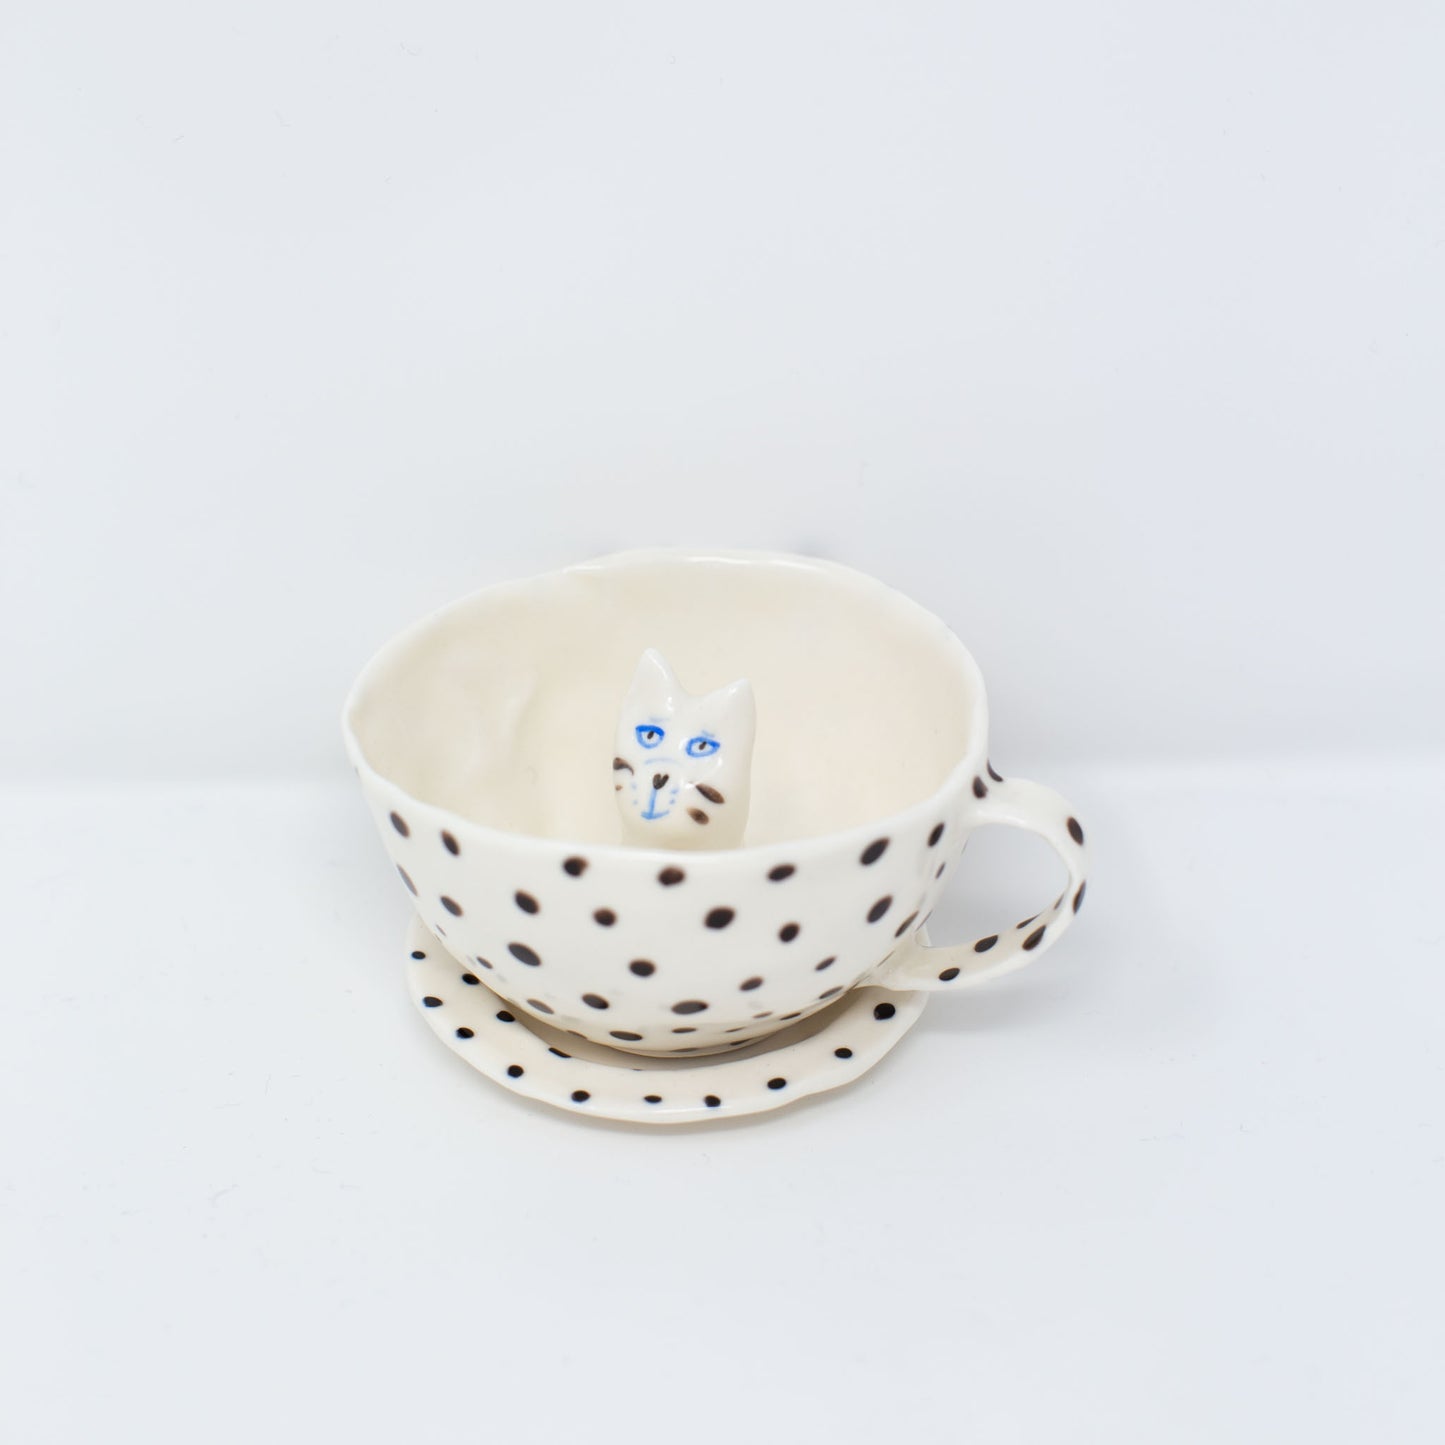 (20% off) Black Polka Dot Cat Cup with Saucer by Eleonor Bostrom